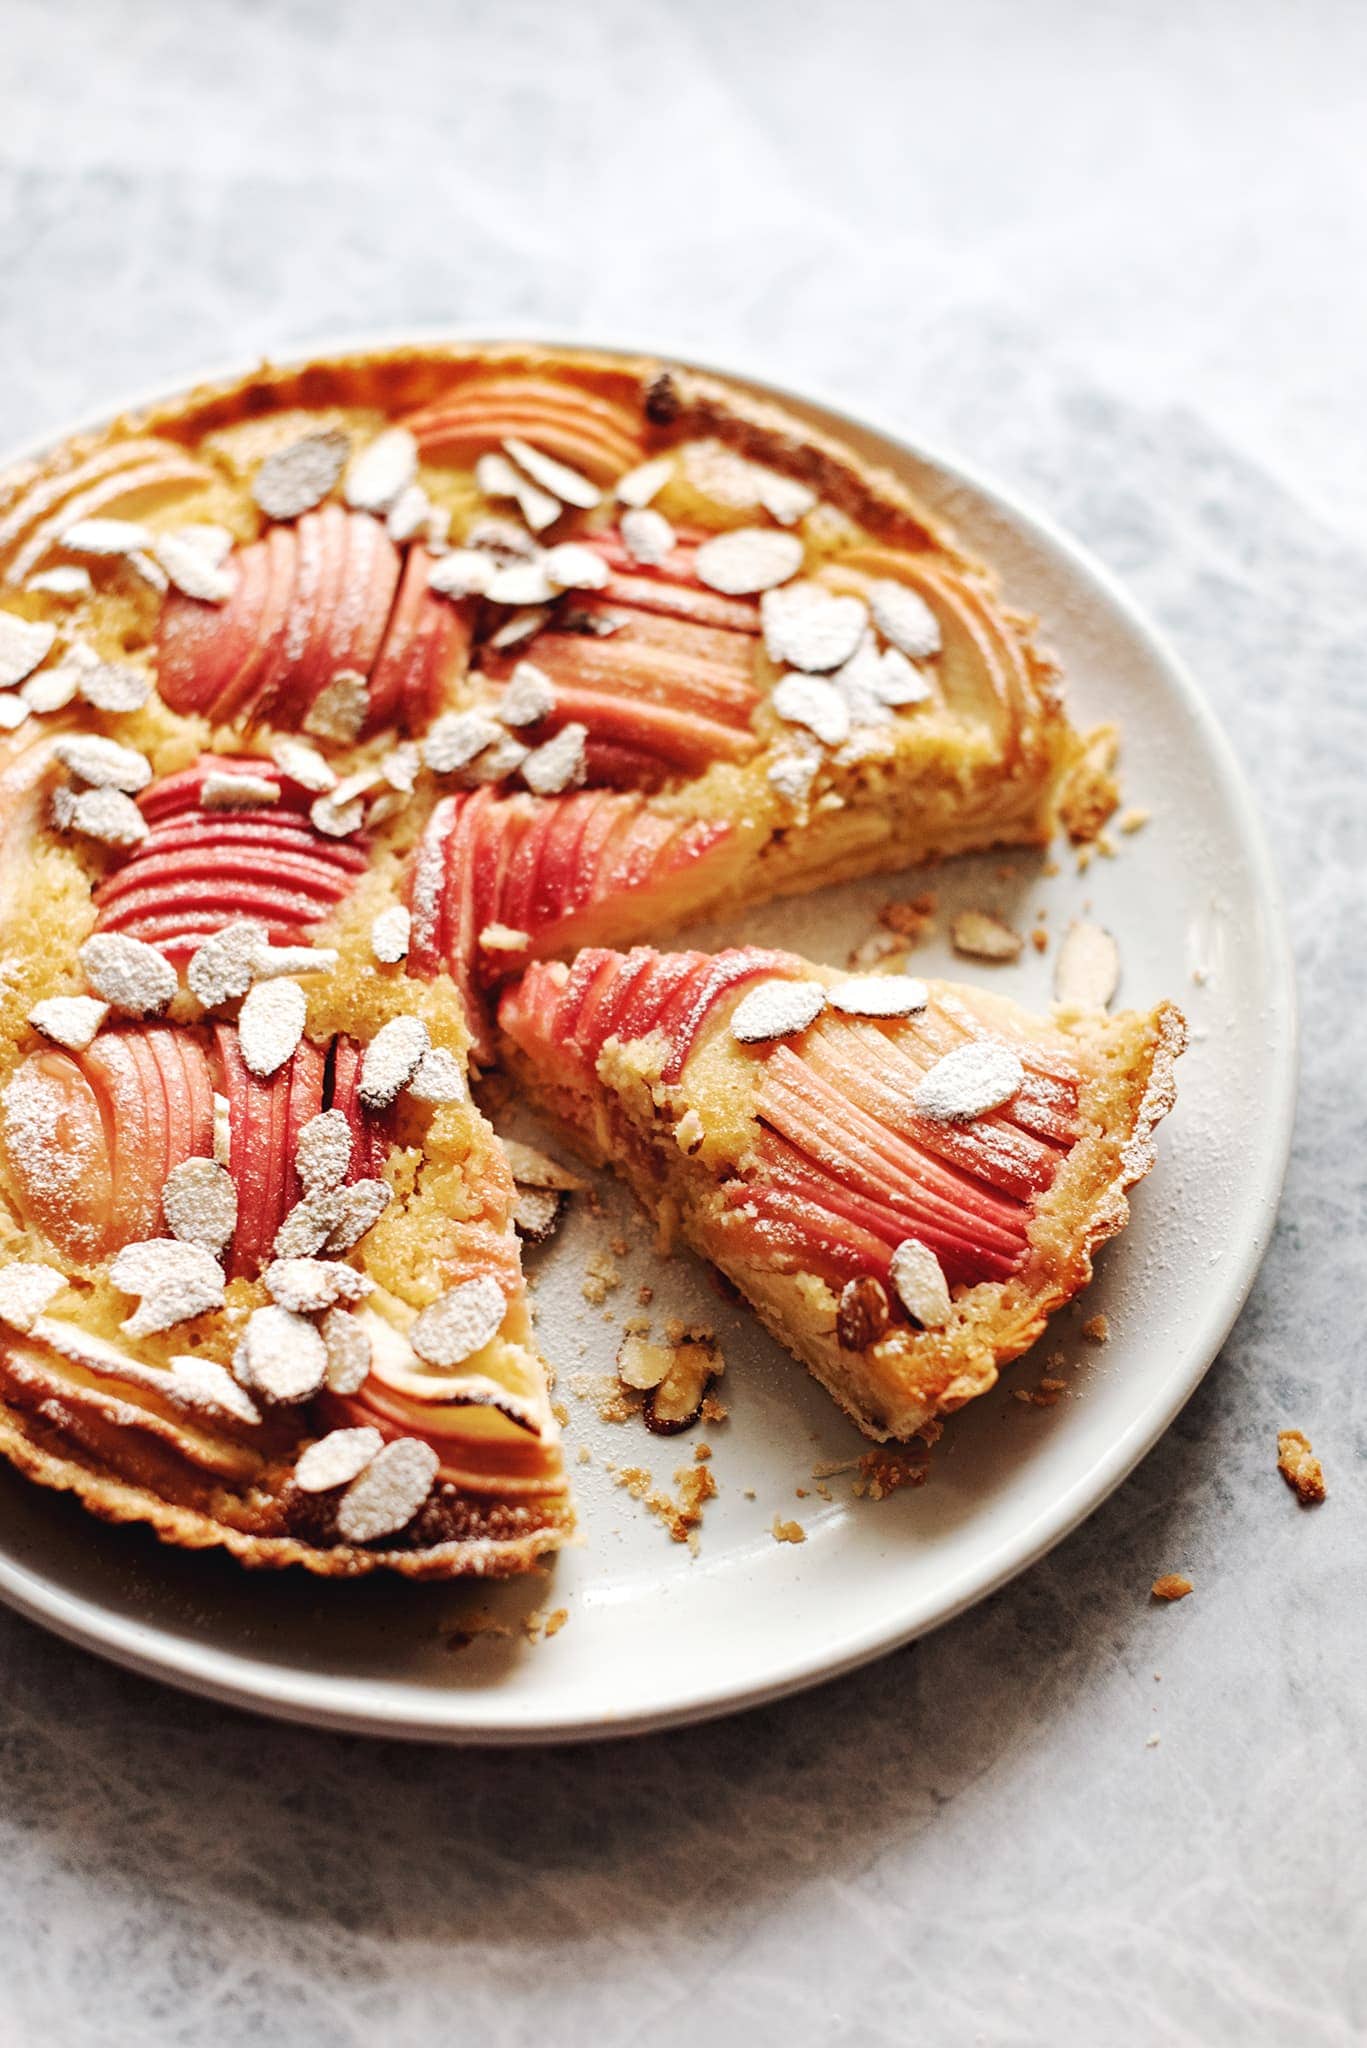 apple and frangipane tart with a slice cut out of it